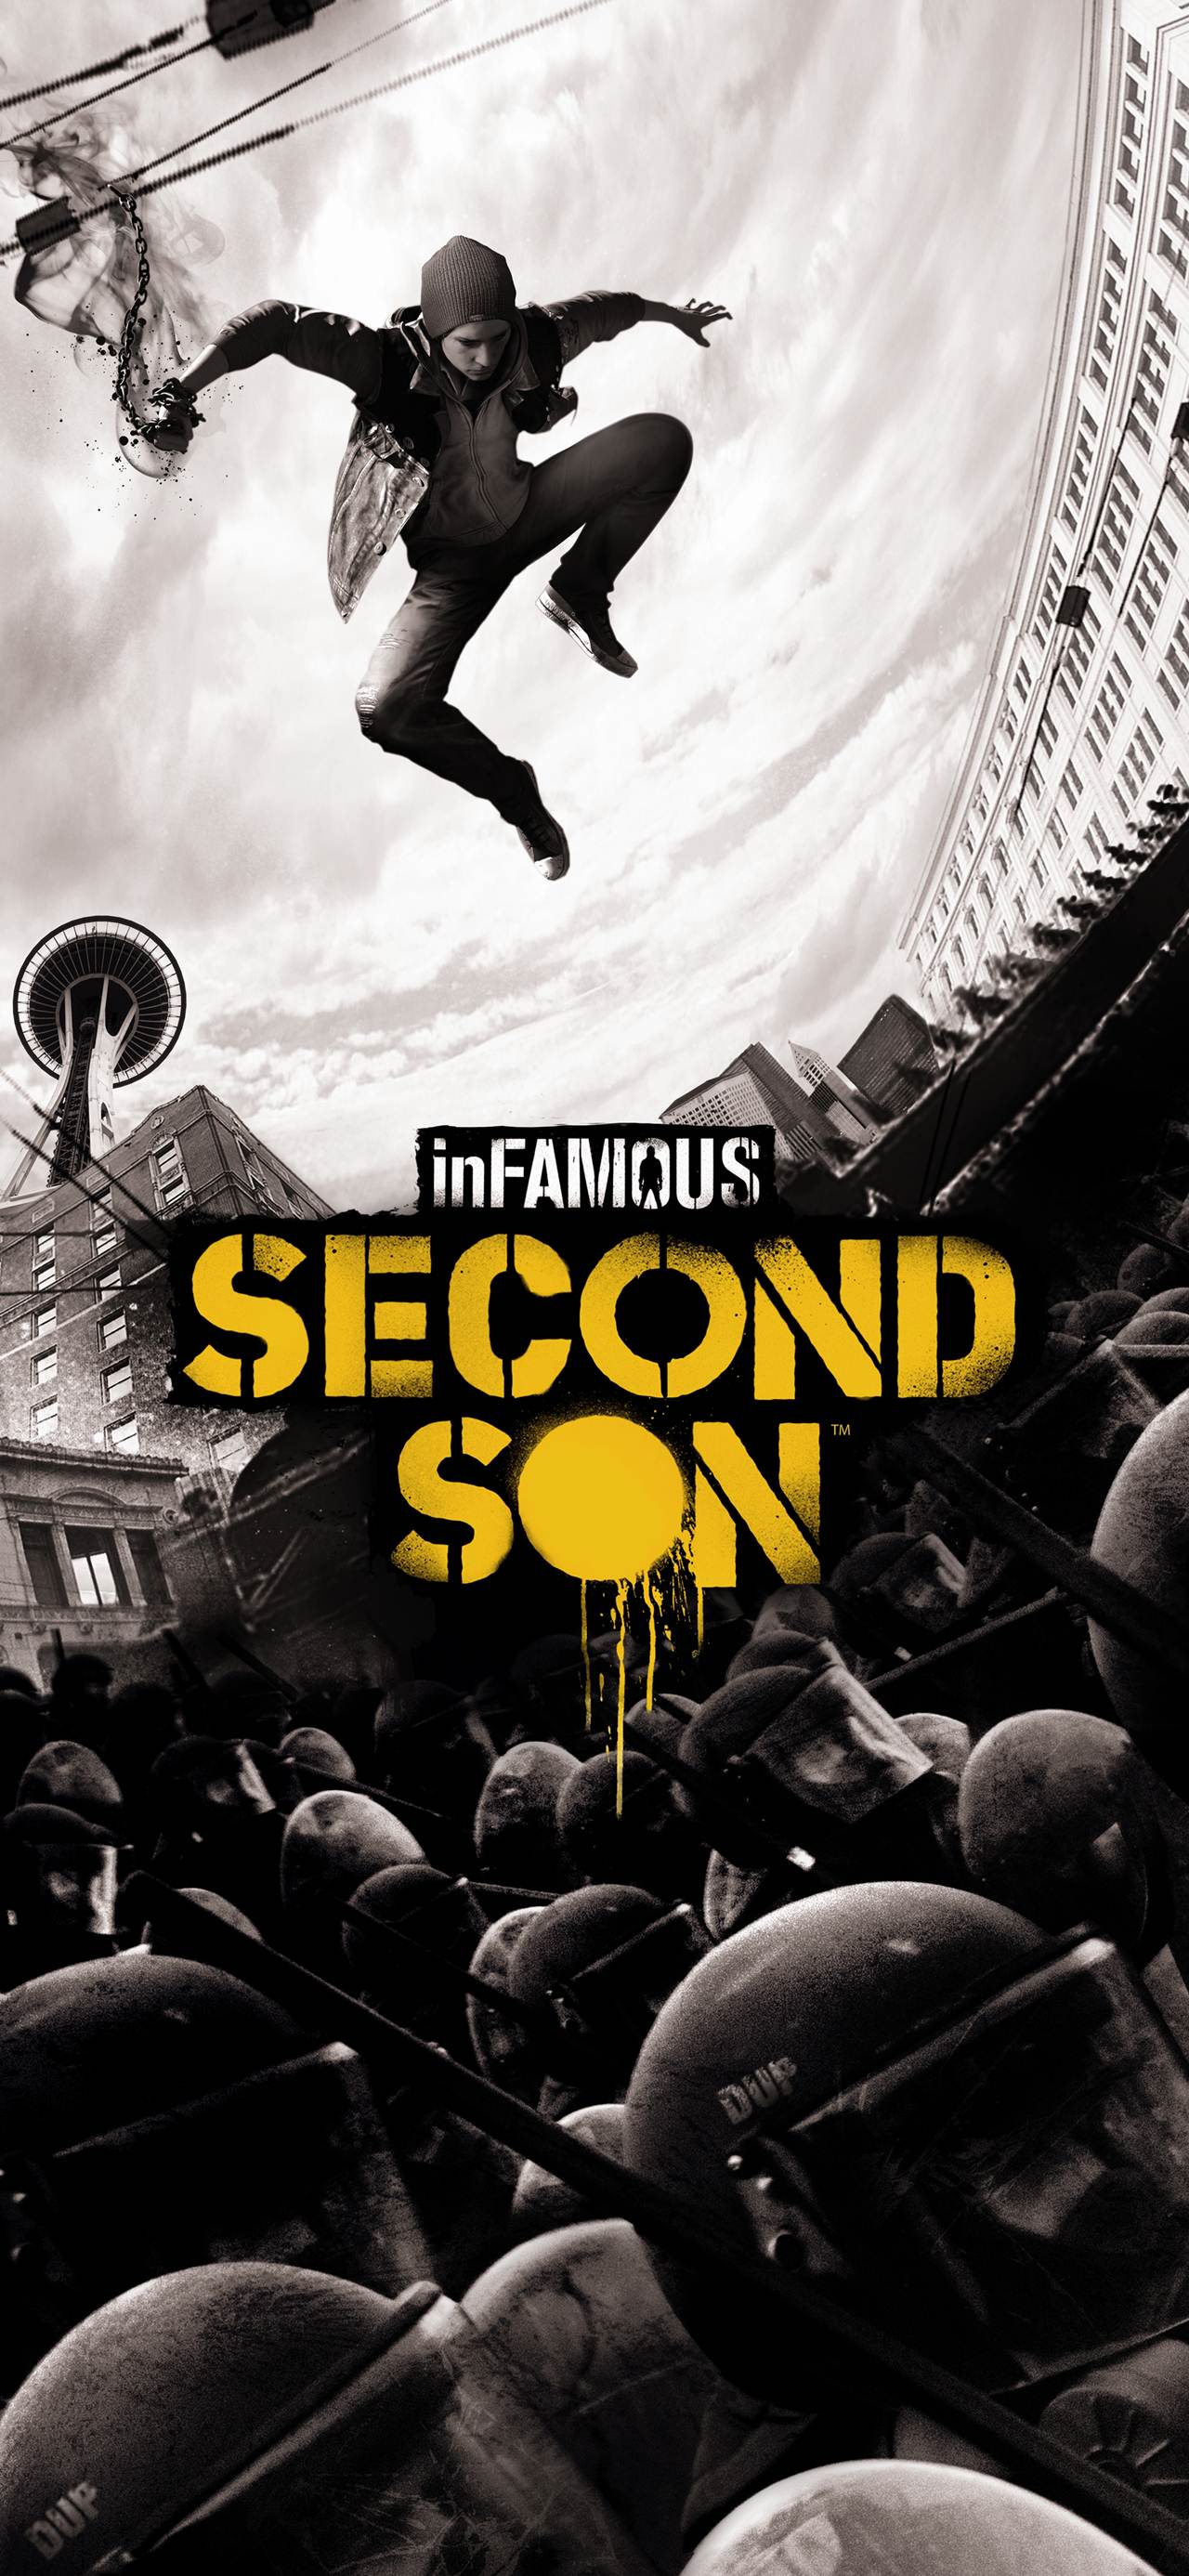 75+ Infamous Second Son Wallpaper Android